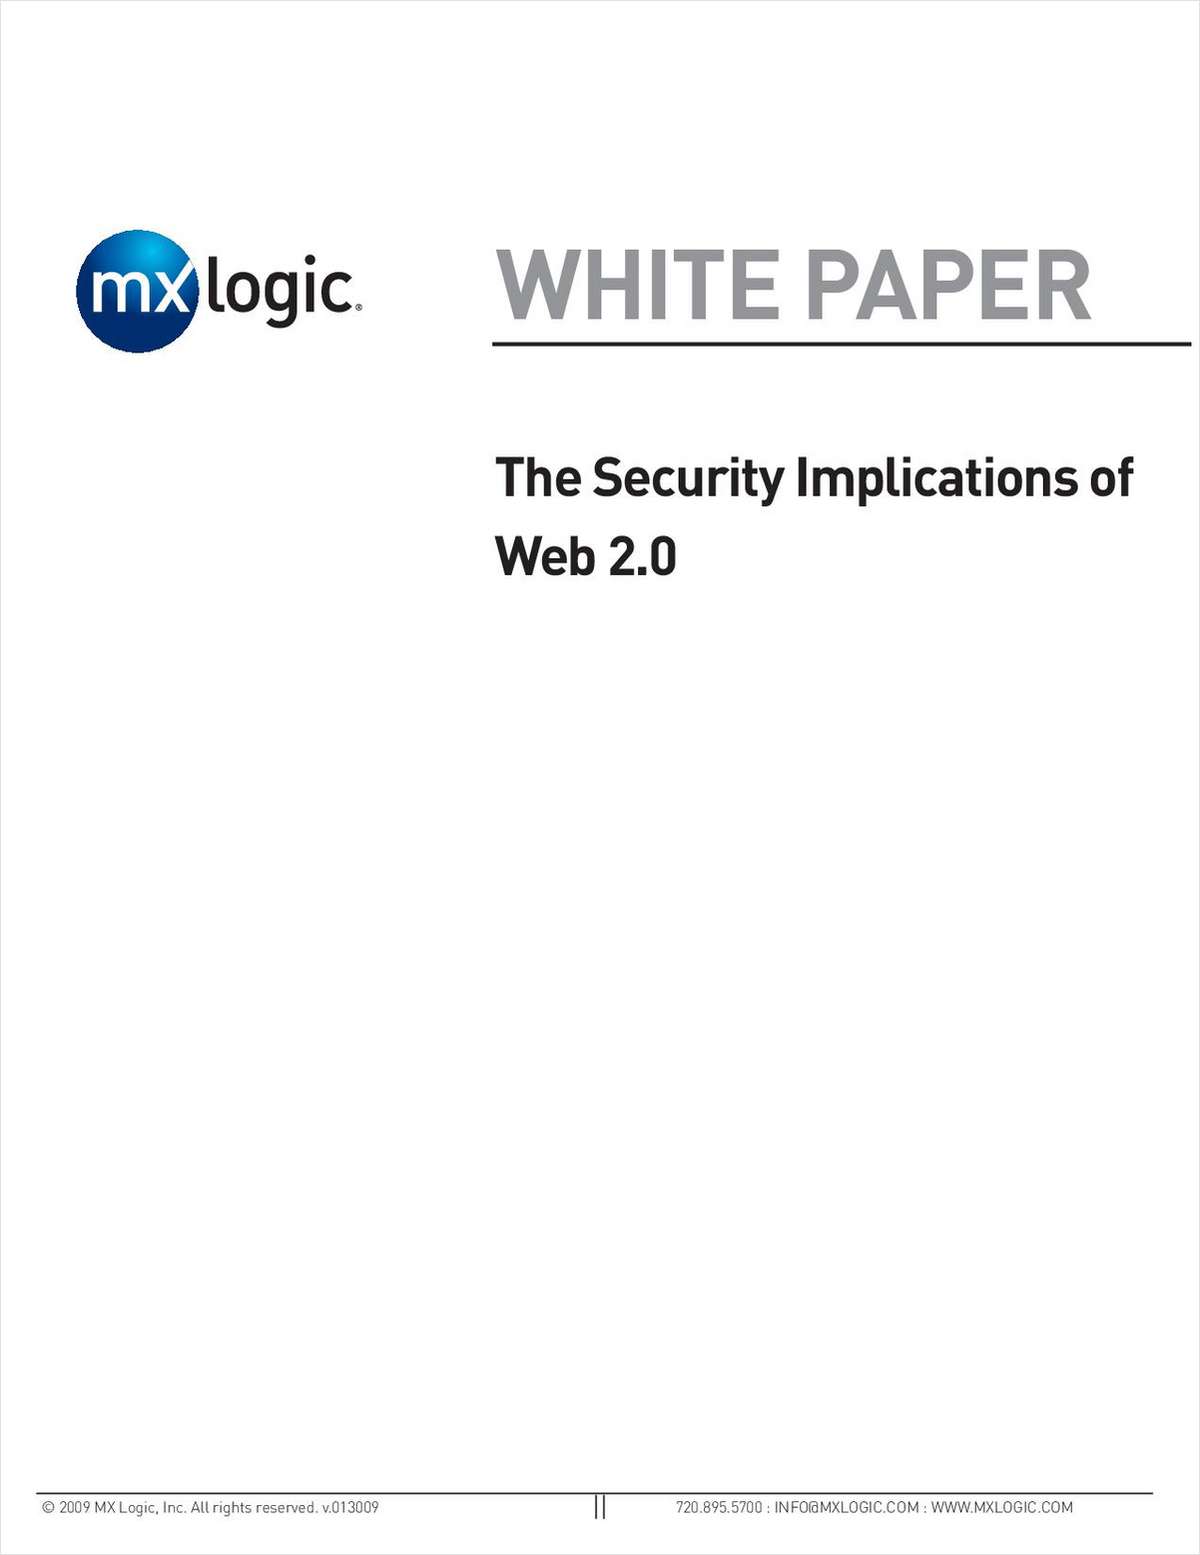 The Security Implications of Web 2.0